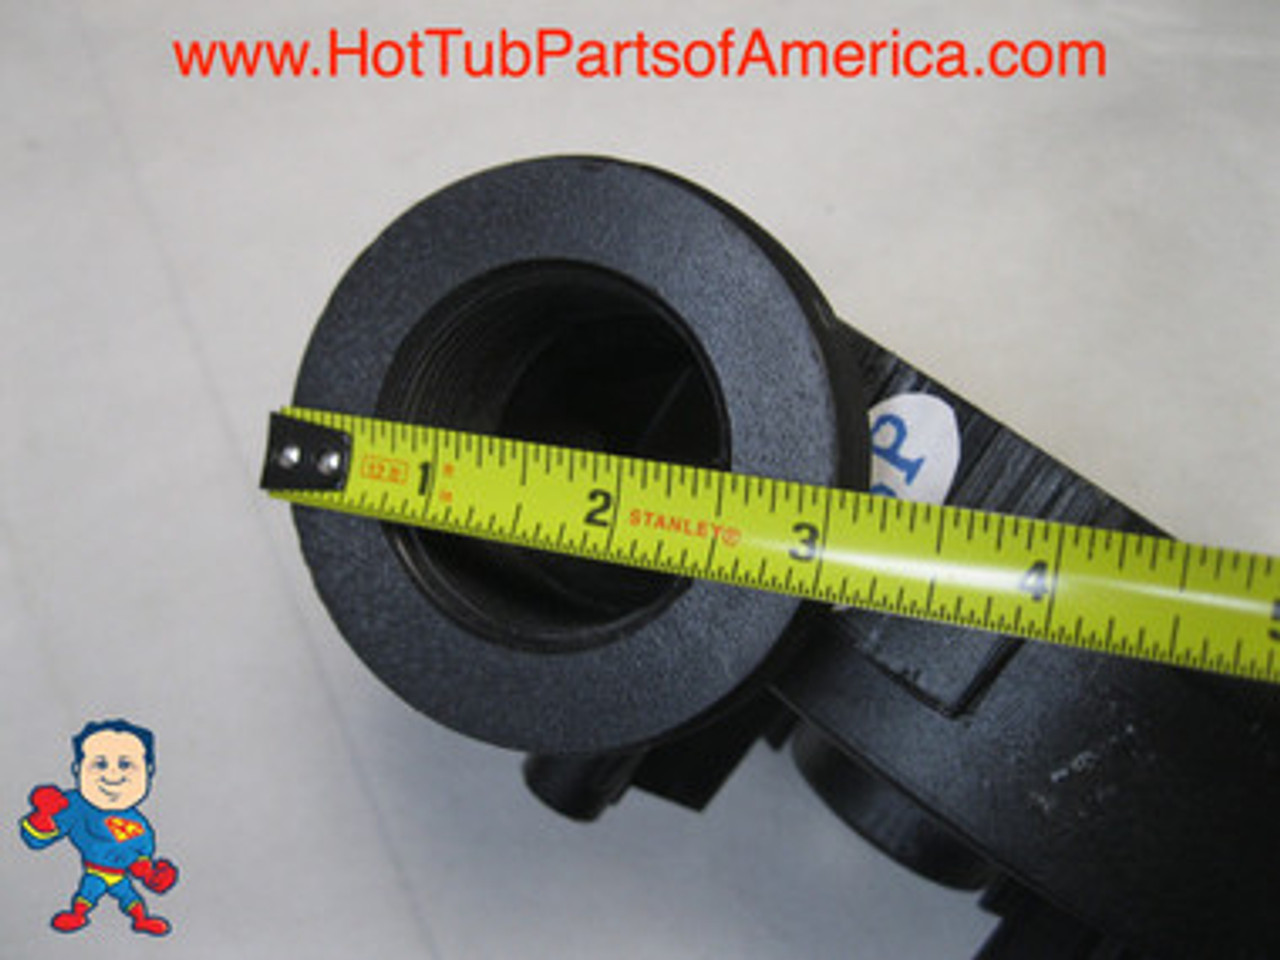 The Threaded parts of this Wet End are called 2" and measure 3" edge to edge..